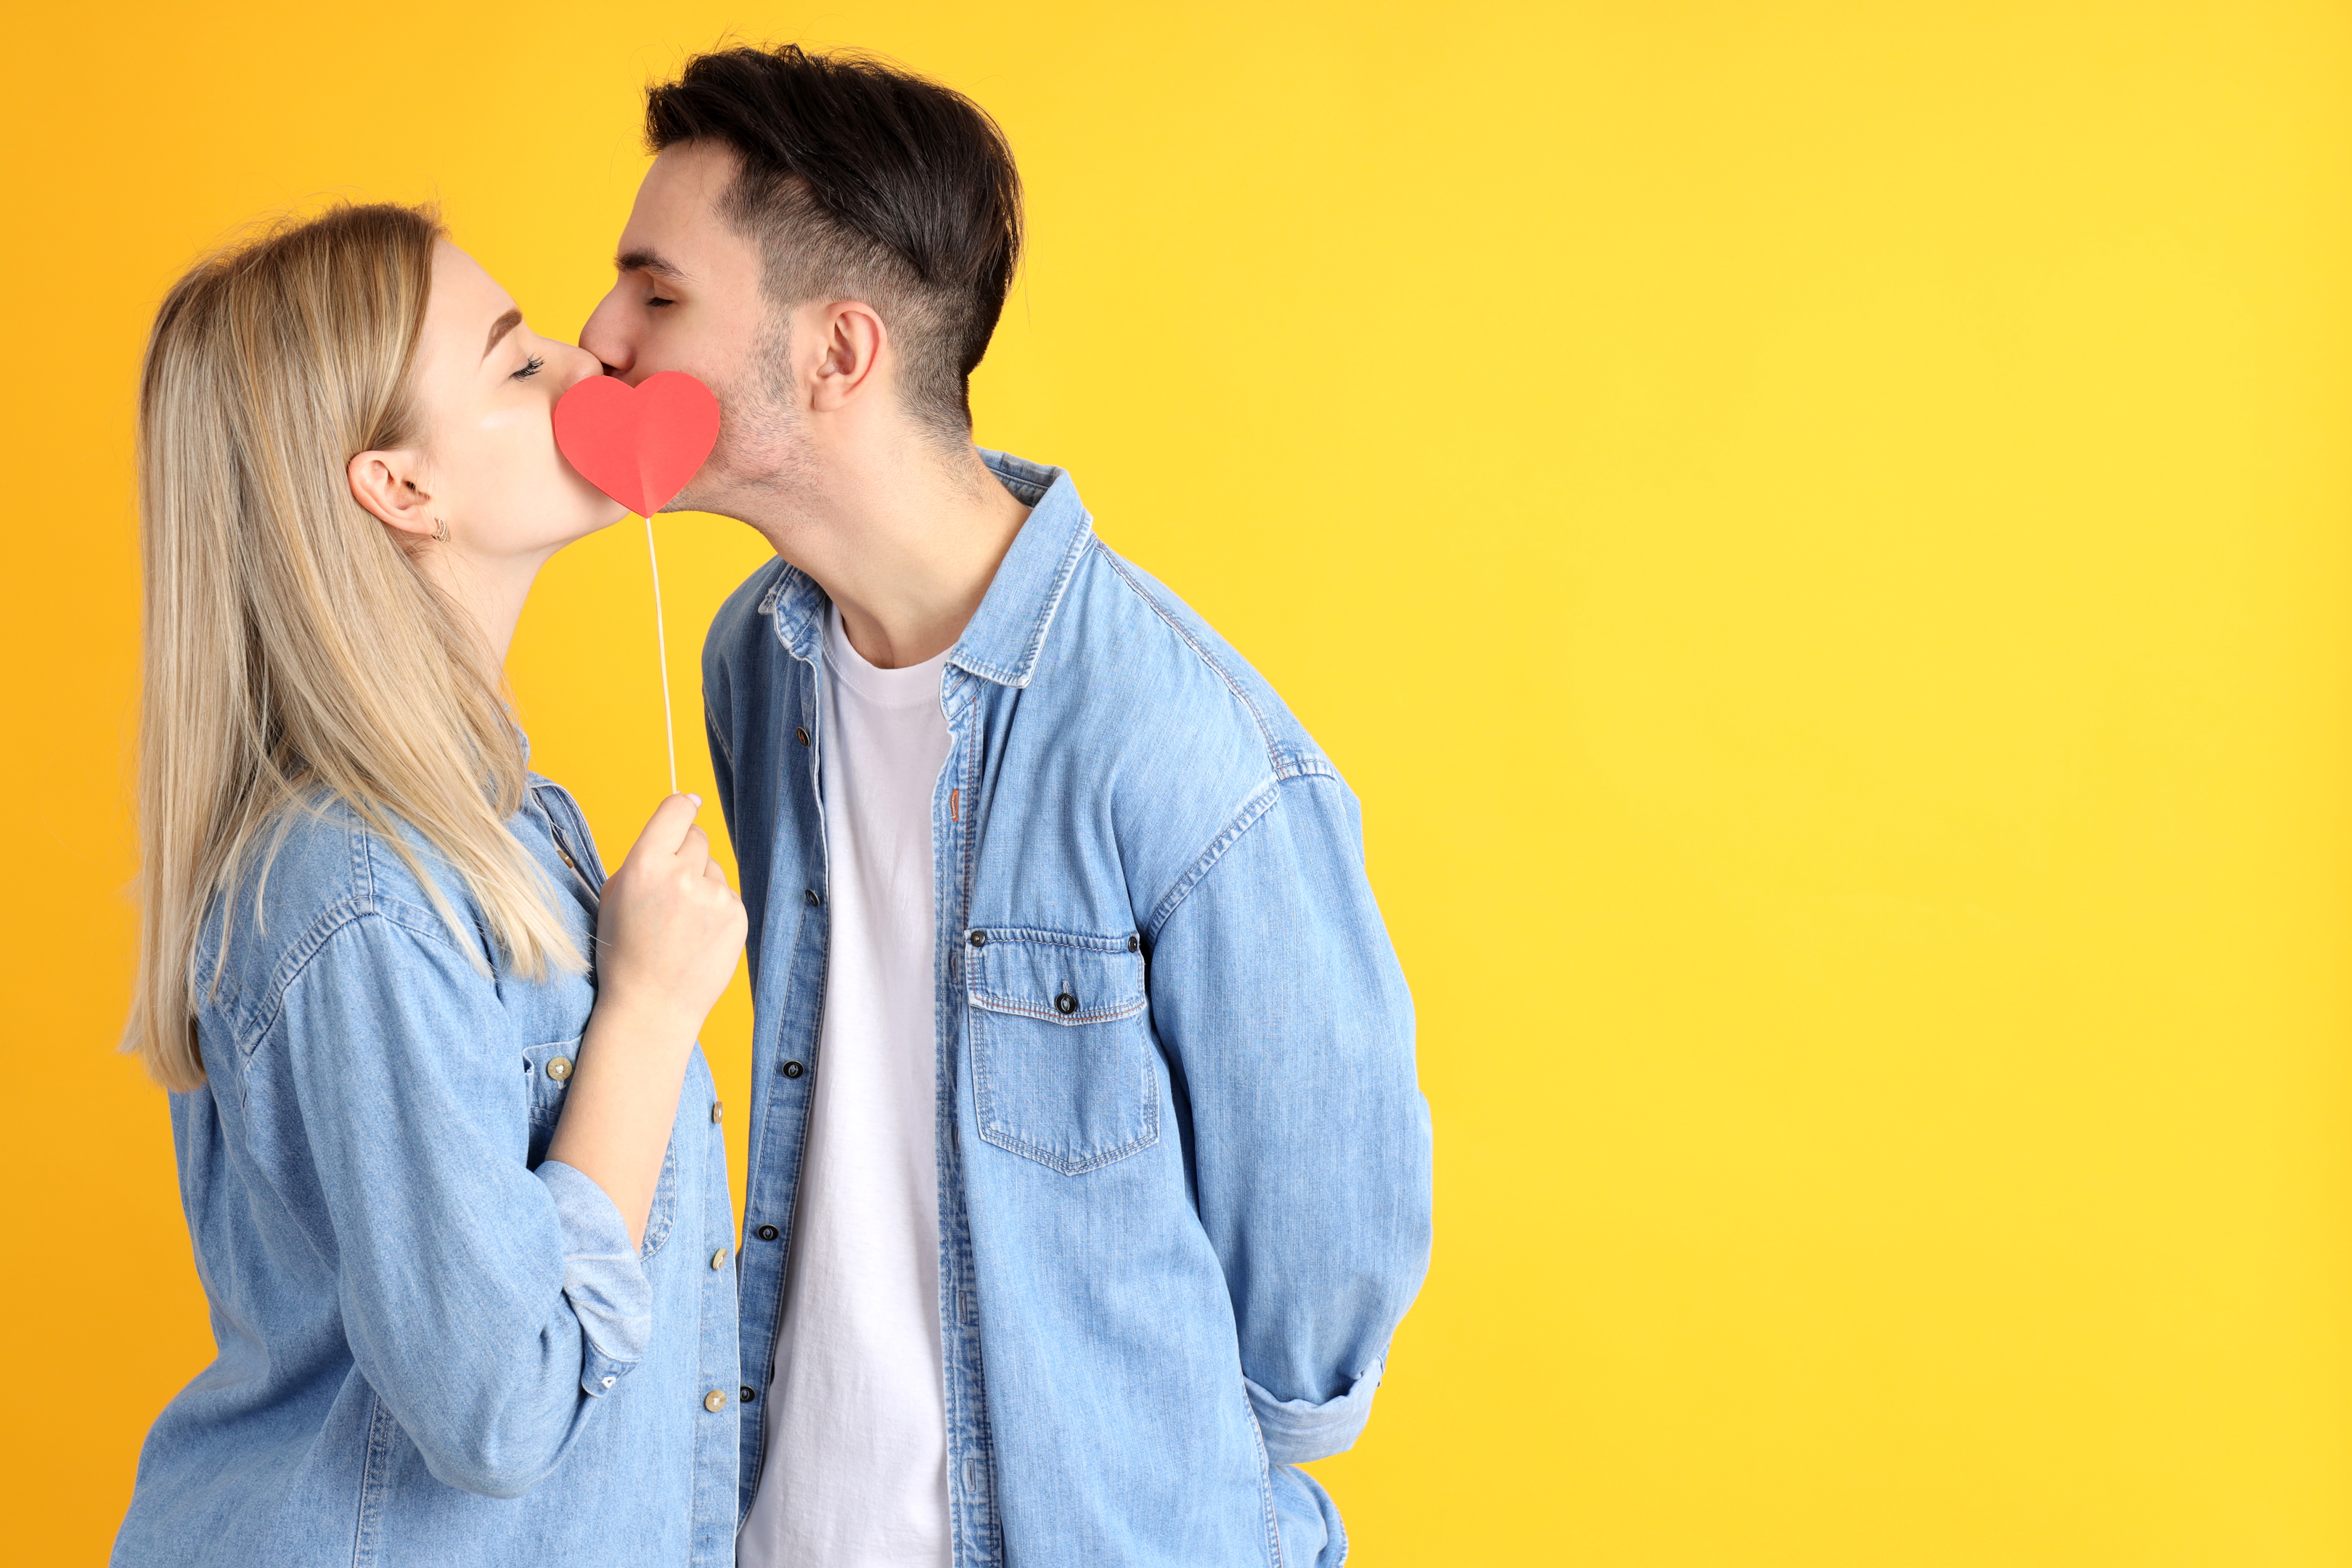 Unless you have a wound, sore or broken skin in your mouth, kissing can't spread it